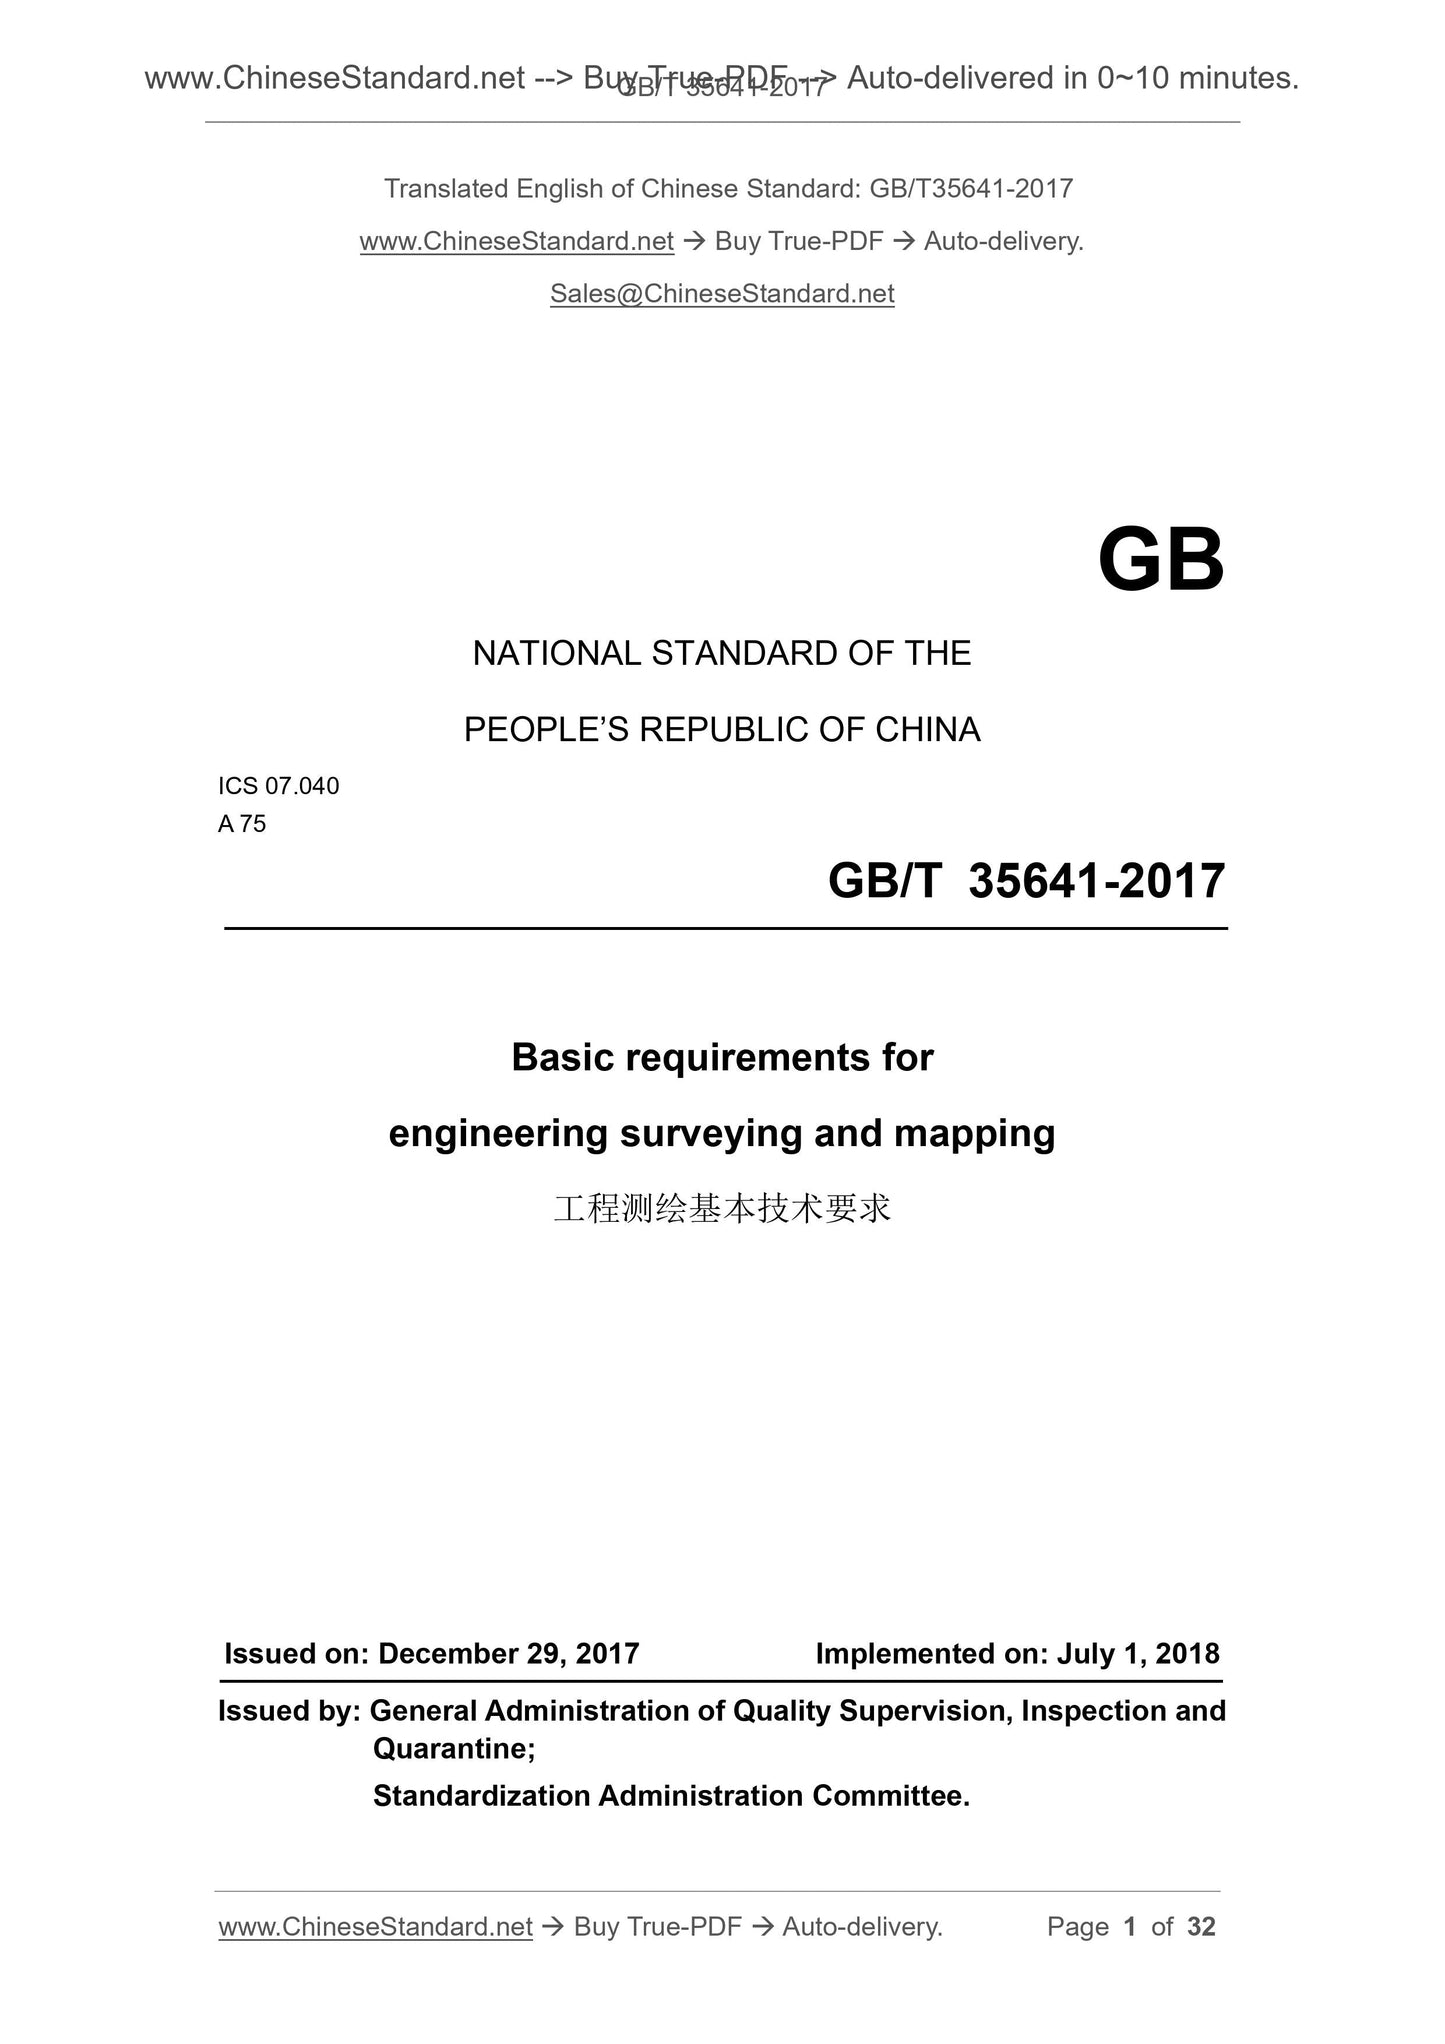 GB/T 35641-2017 Page 1